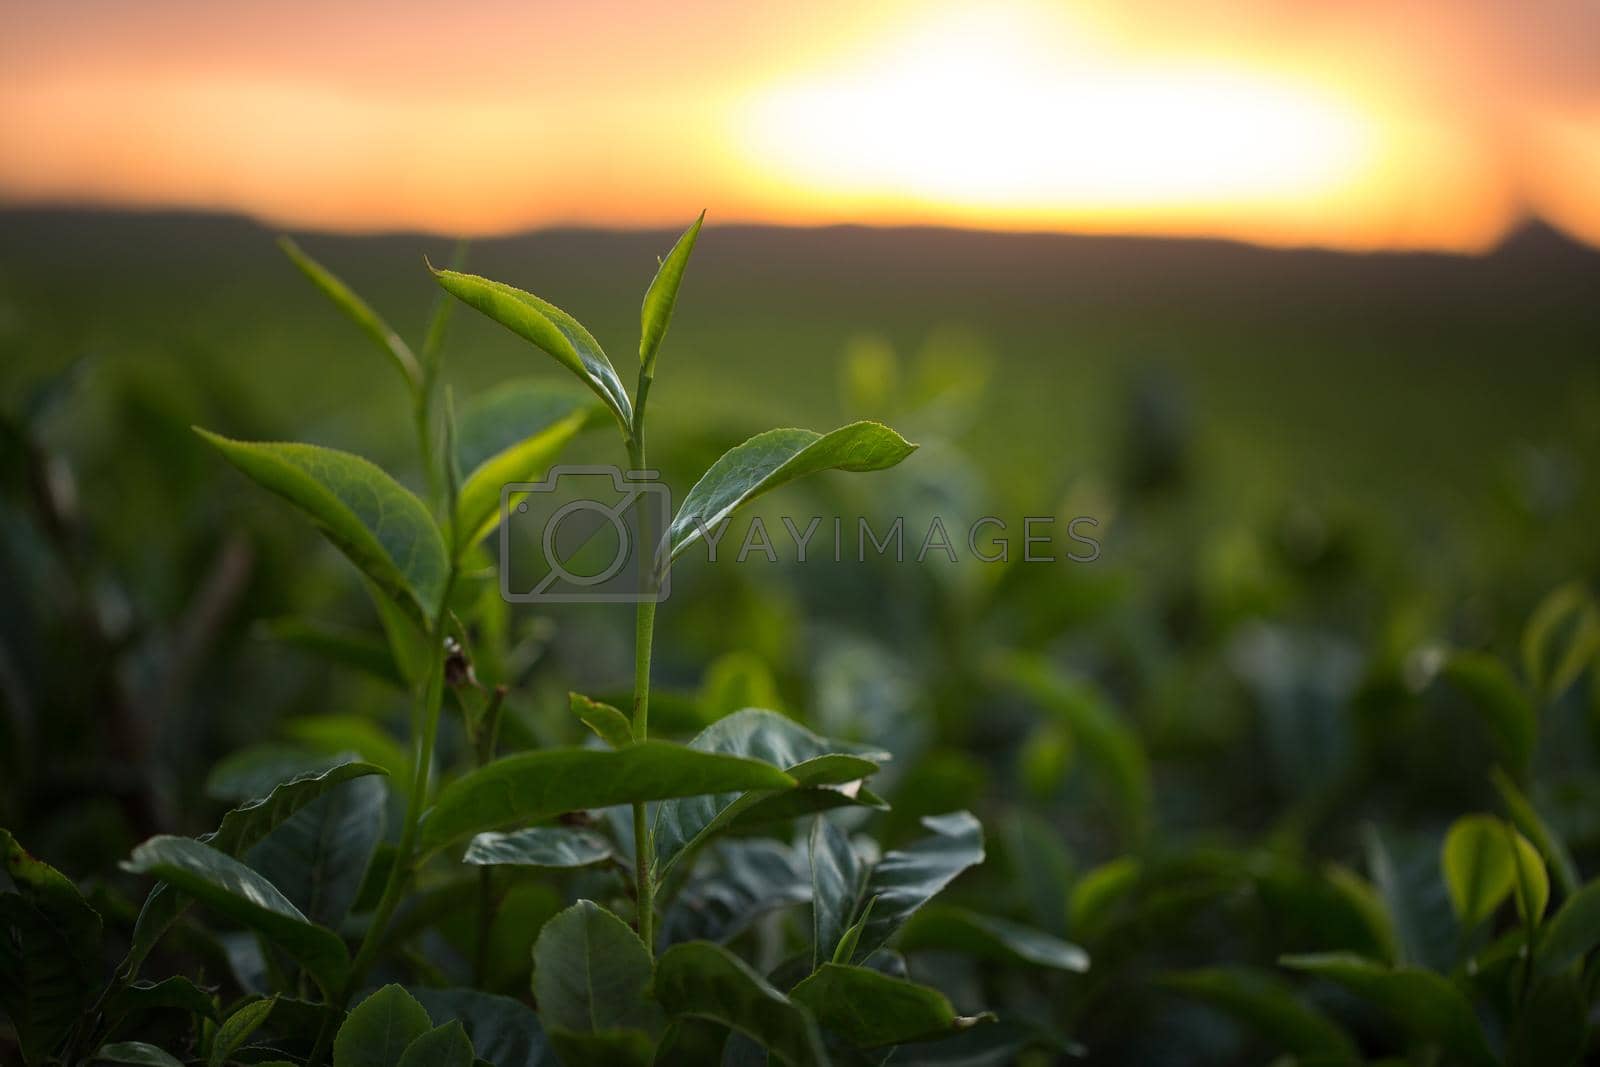 Royalty free image of Green tea bud and fresh leaves. Tea plantations by StudioPeace